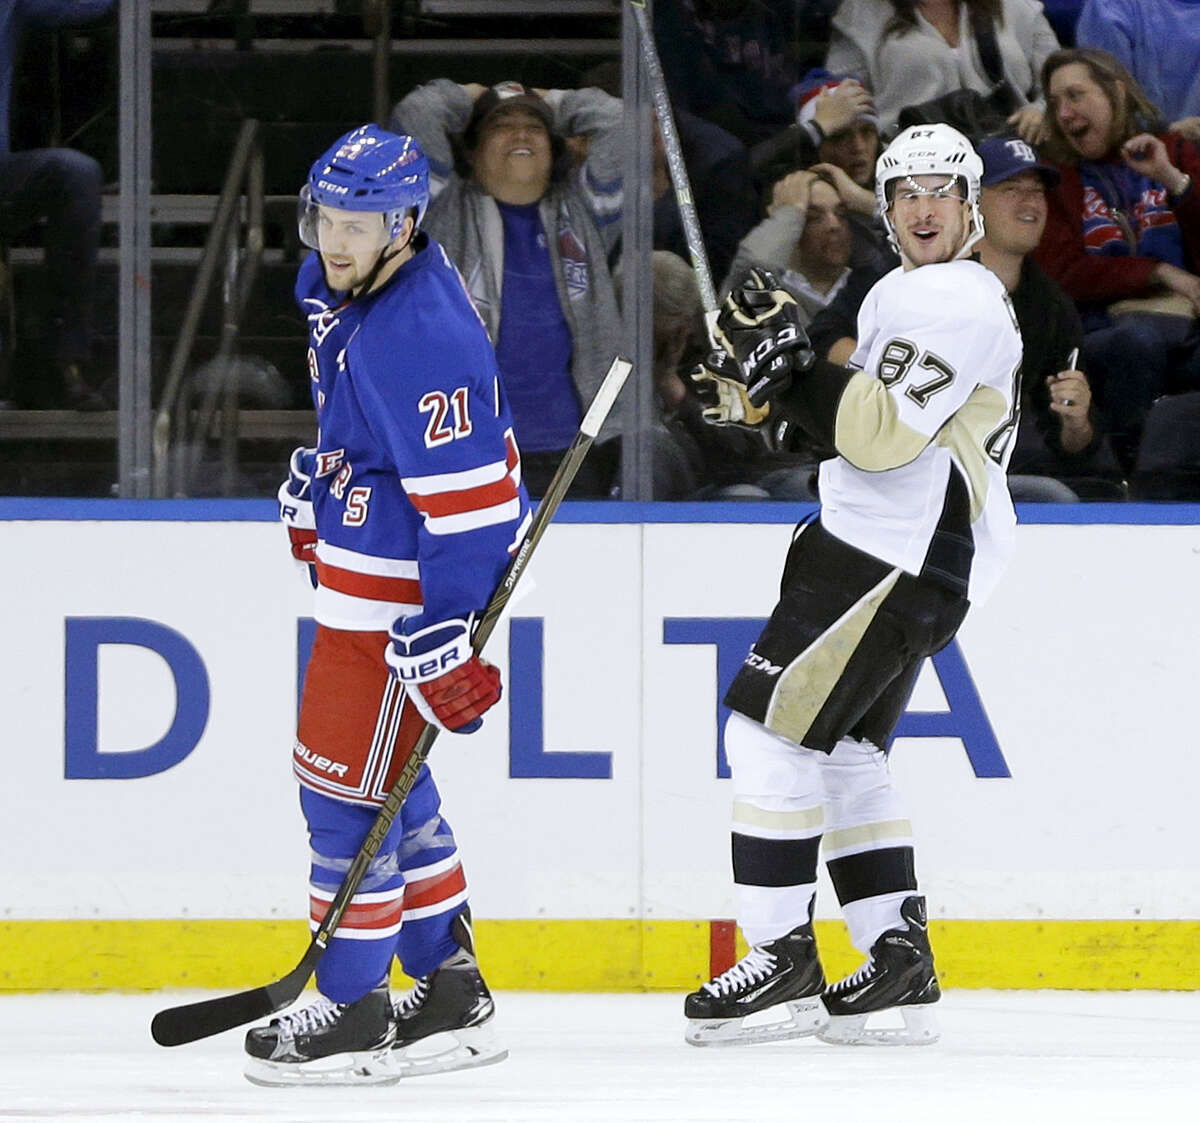 Pittsburgh Penguins’ Sidney Crosby, right, and New York Rangers’ Derek Stepan react after Crosby scored the game winning goal during the overtime period Sunday in New York. The Penguins defeated the Rangers 3-2.